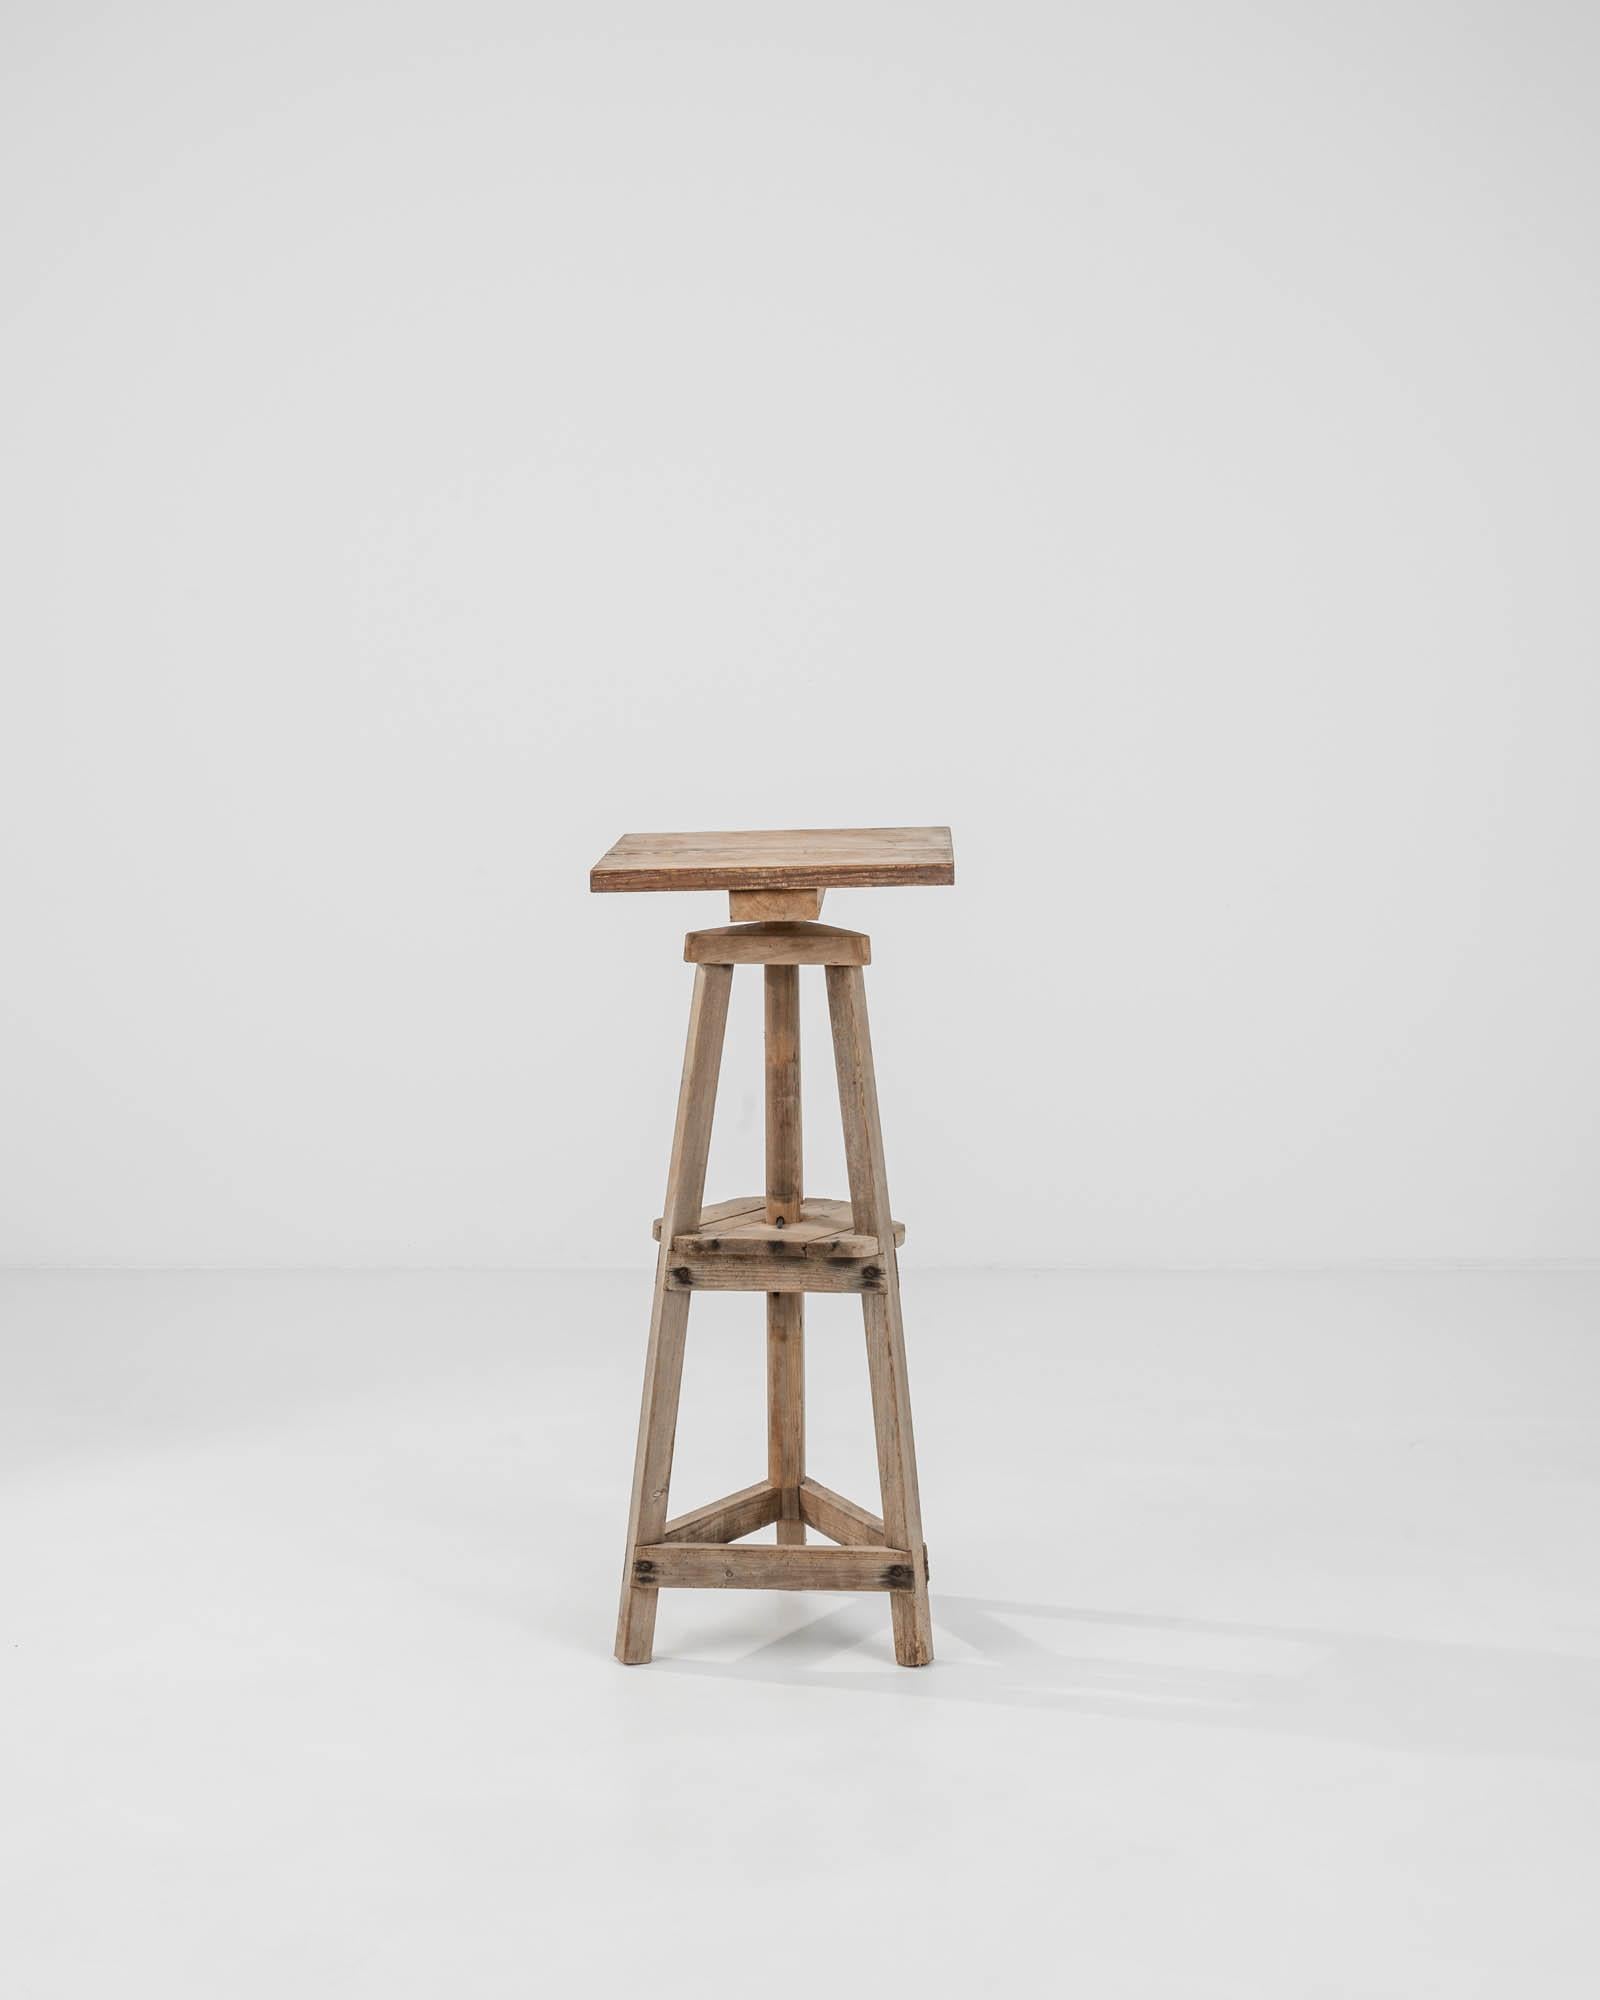 Elevate your space with this authentic 20th Century Belgian Wooden Pedestal, a piece that artfully marries rustic charm with functionality. Crafted from sturdy, aged wood, this pedestal stool showcases the natural grain and imperfections that make